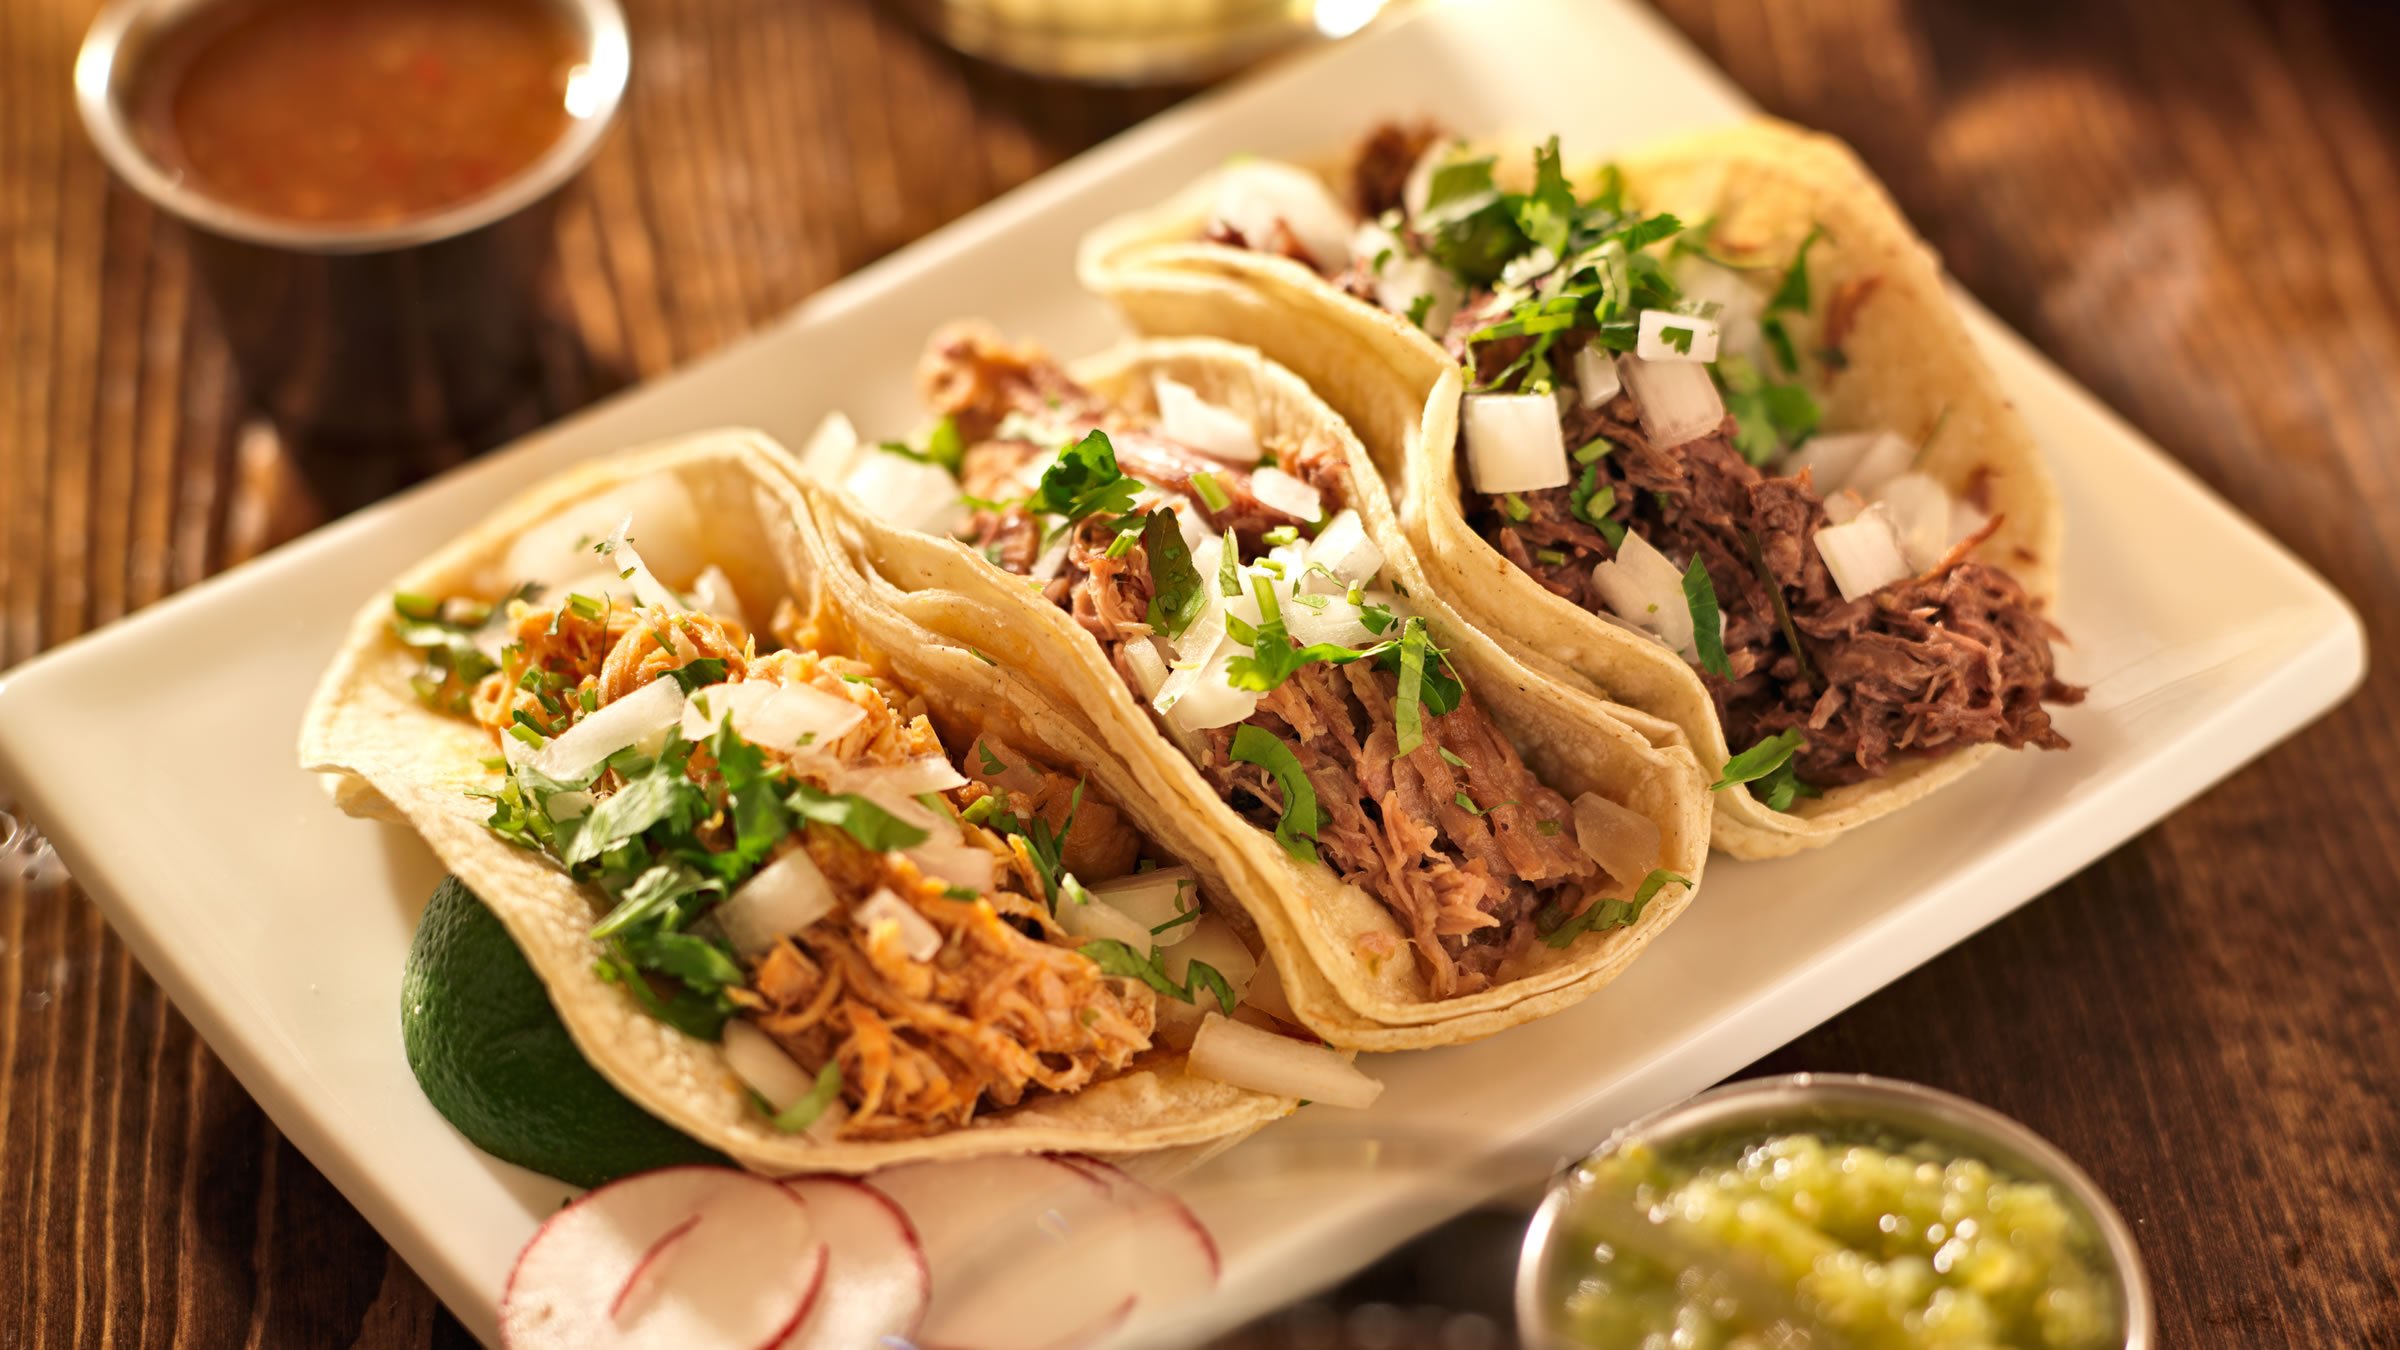 Mexican tacos. File image.